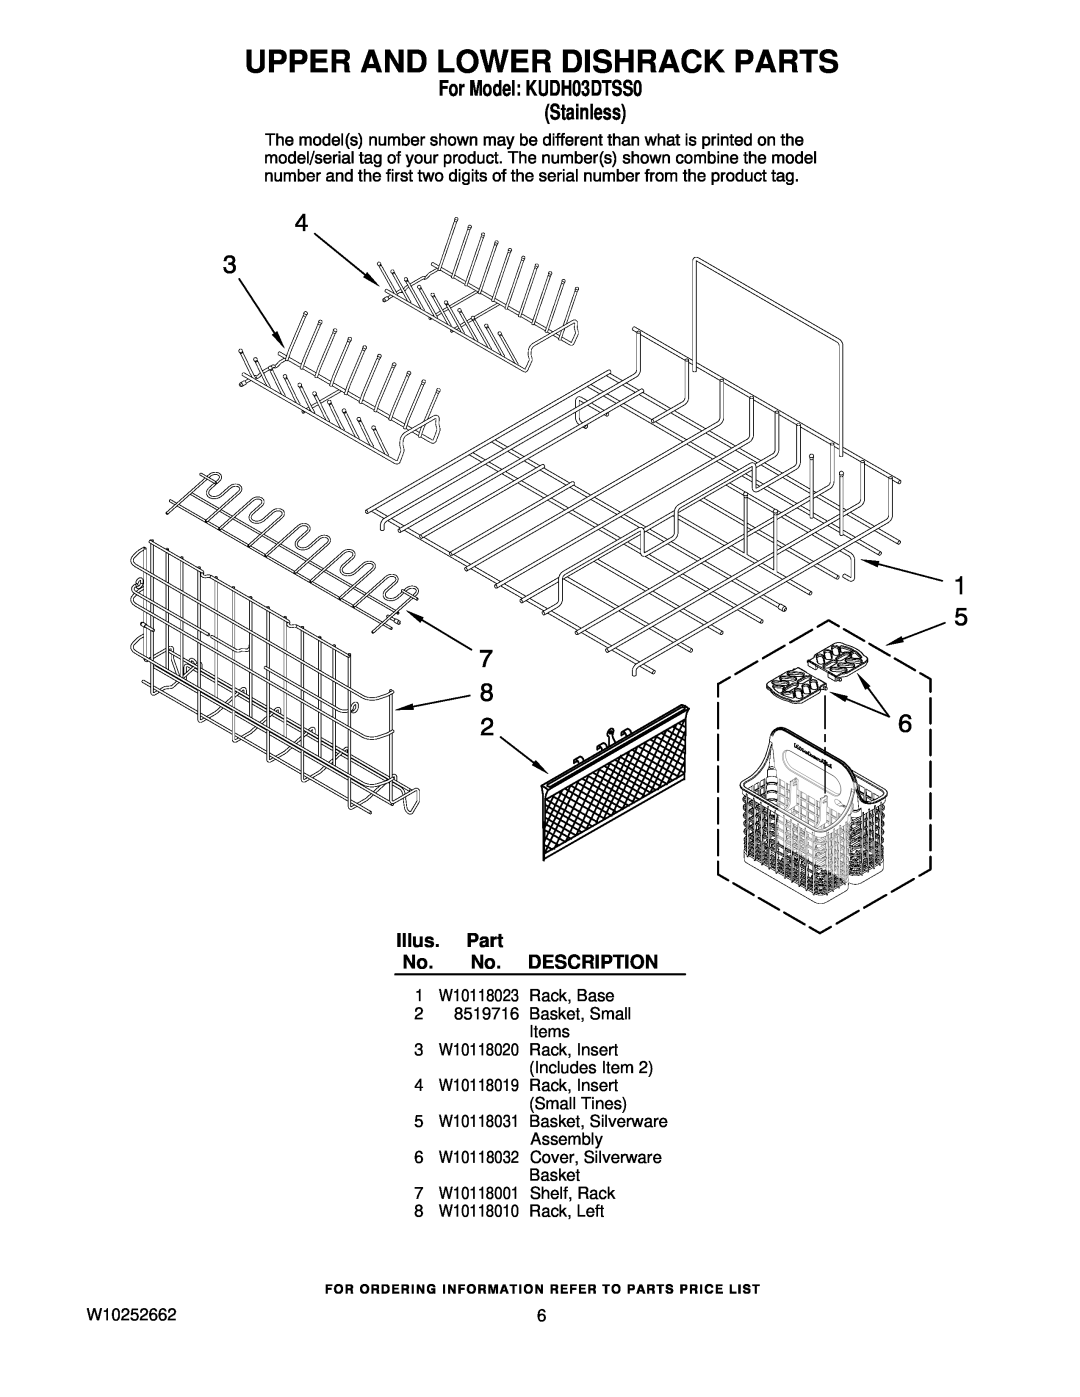 KitchenAid manual Upper And Lower Dishrack Parts, Illus. Part No. No. DESCRIPTION, For Model KUDH03DTSS0 Stainless 